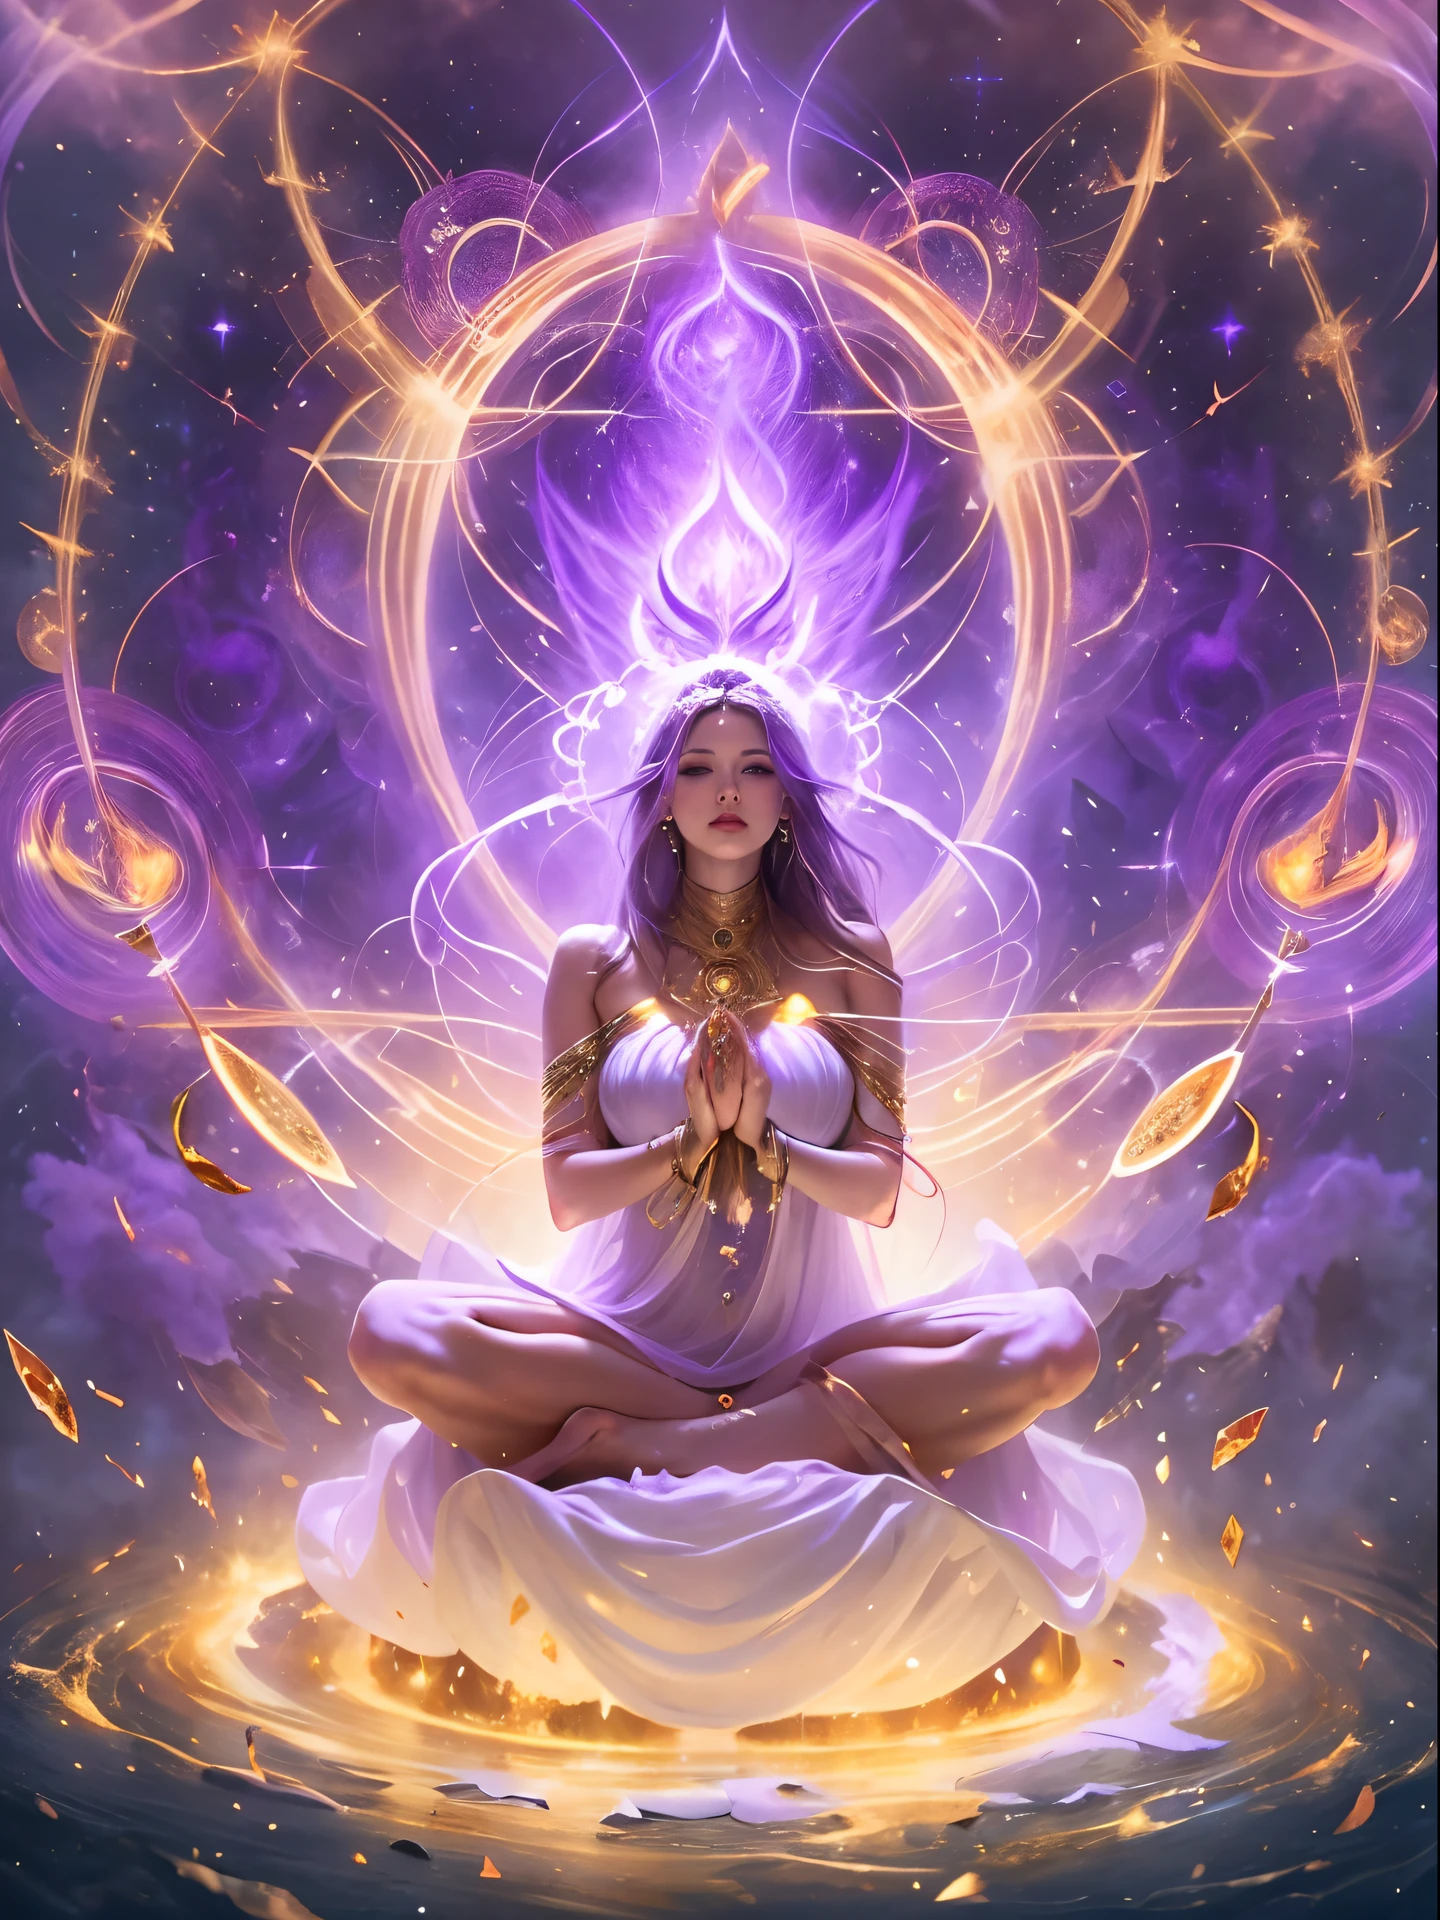 fire멸의 여신, very beautiful, 8 thousand, super big , meditating, bright white cloth covering part of the body, sitting cross-legged, Golden glowing magic circle spinning behind her, A magical purple aura surrounds her area., magical violet fire, fancy, Milky Way Galaxy background, (4 elements, fire, water, wind, earth, surrounding it),